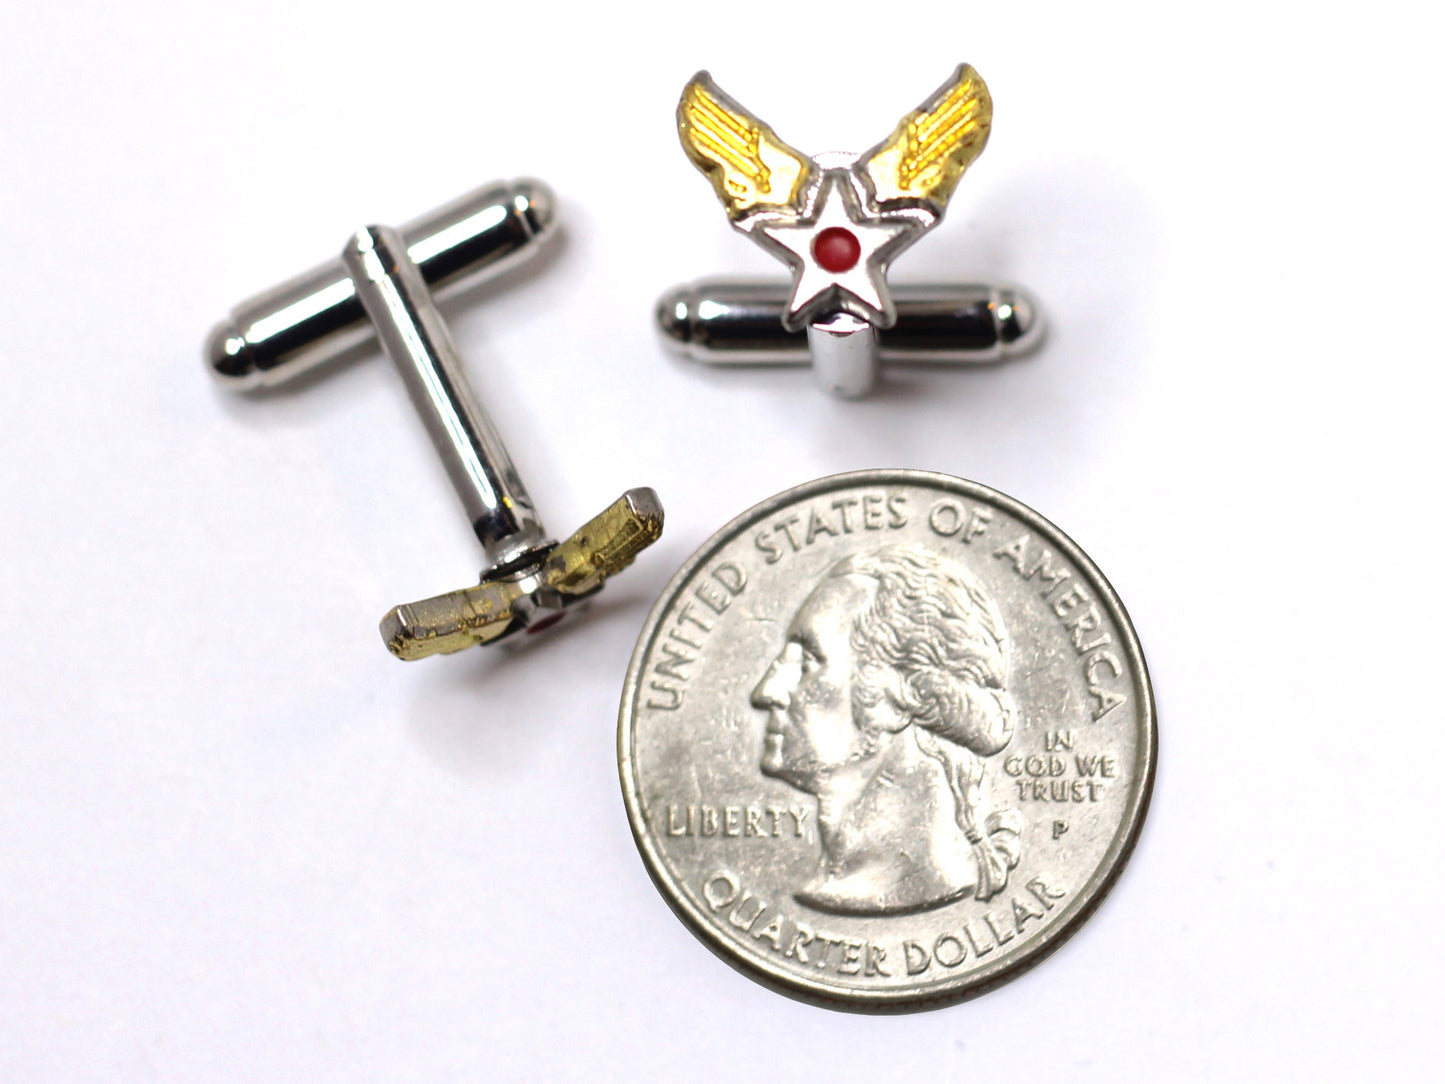 WWII-era Vintage Hap Arnold Wings on Cuff Links | Aviation